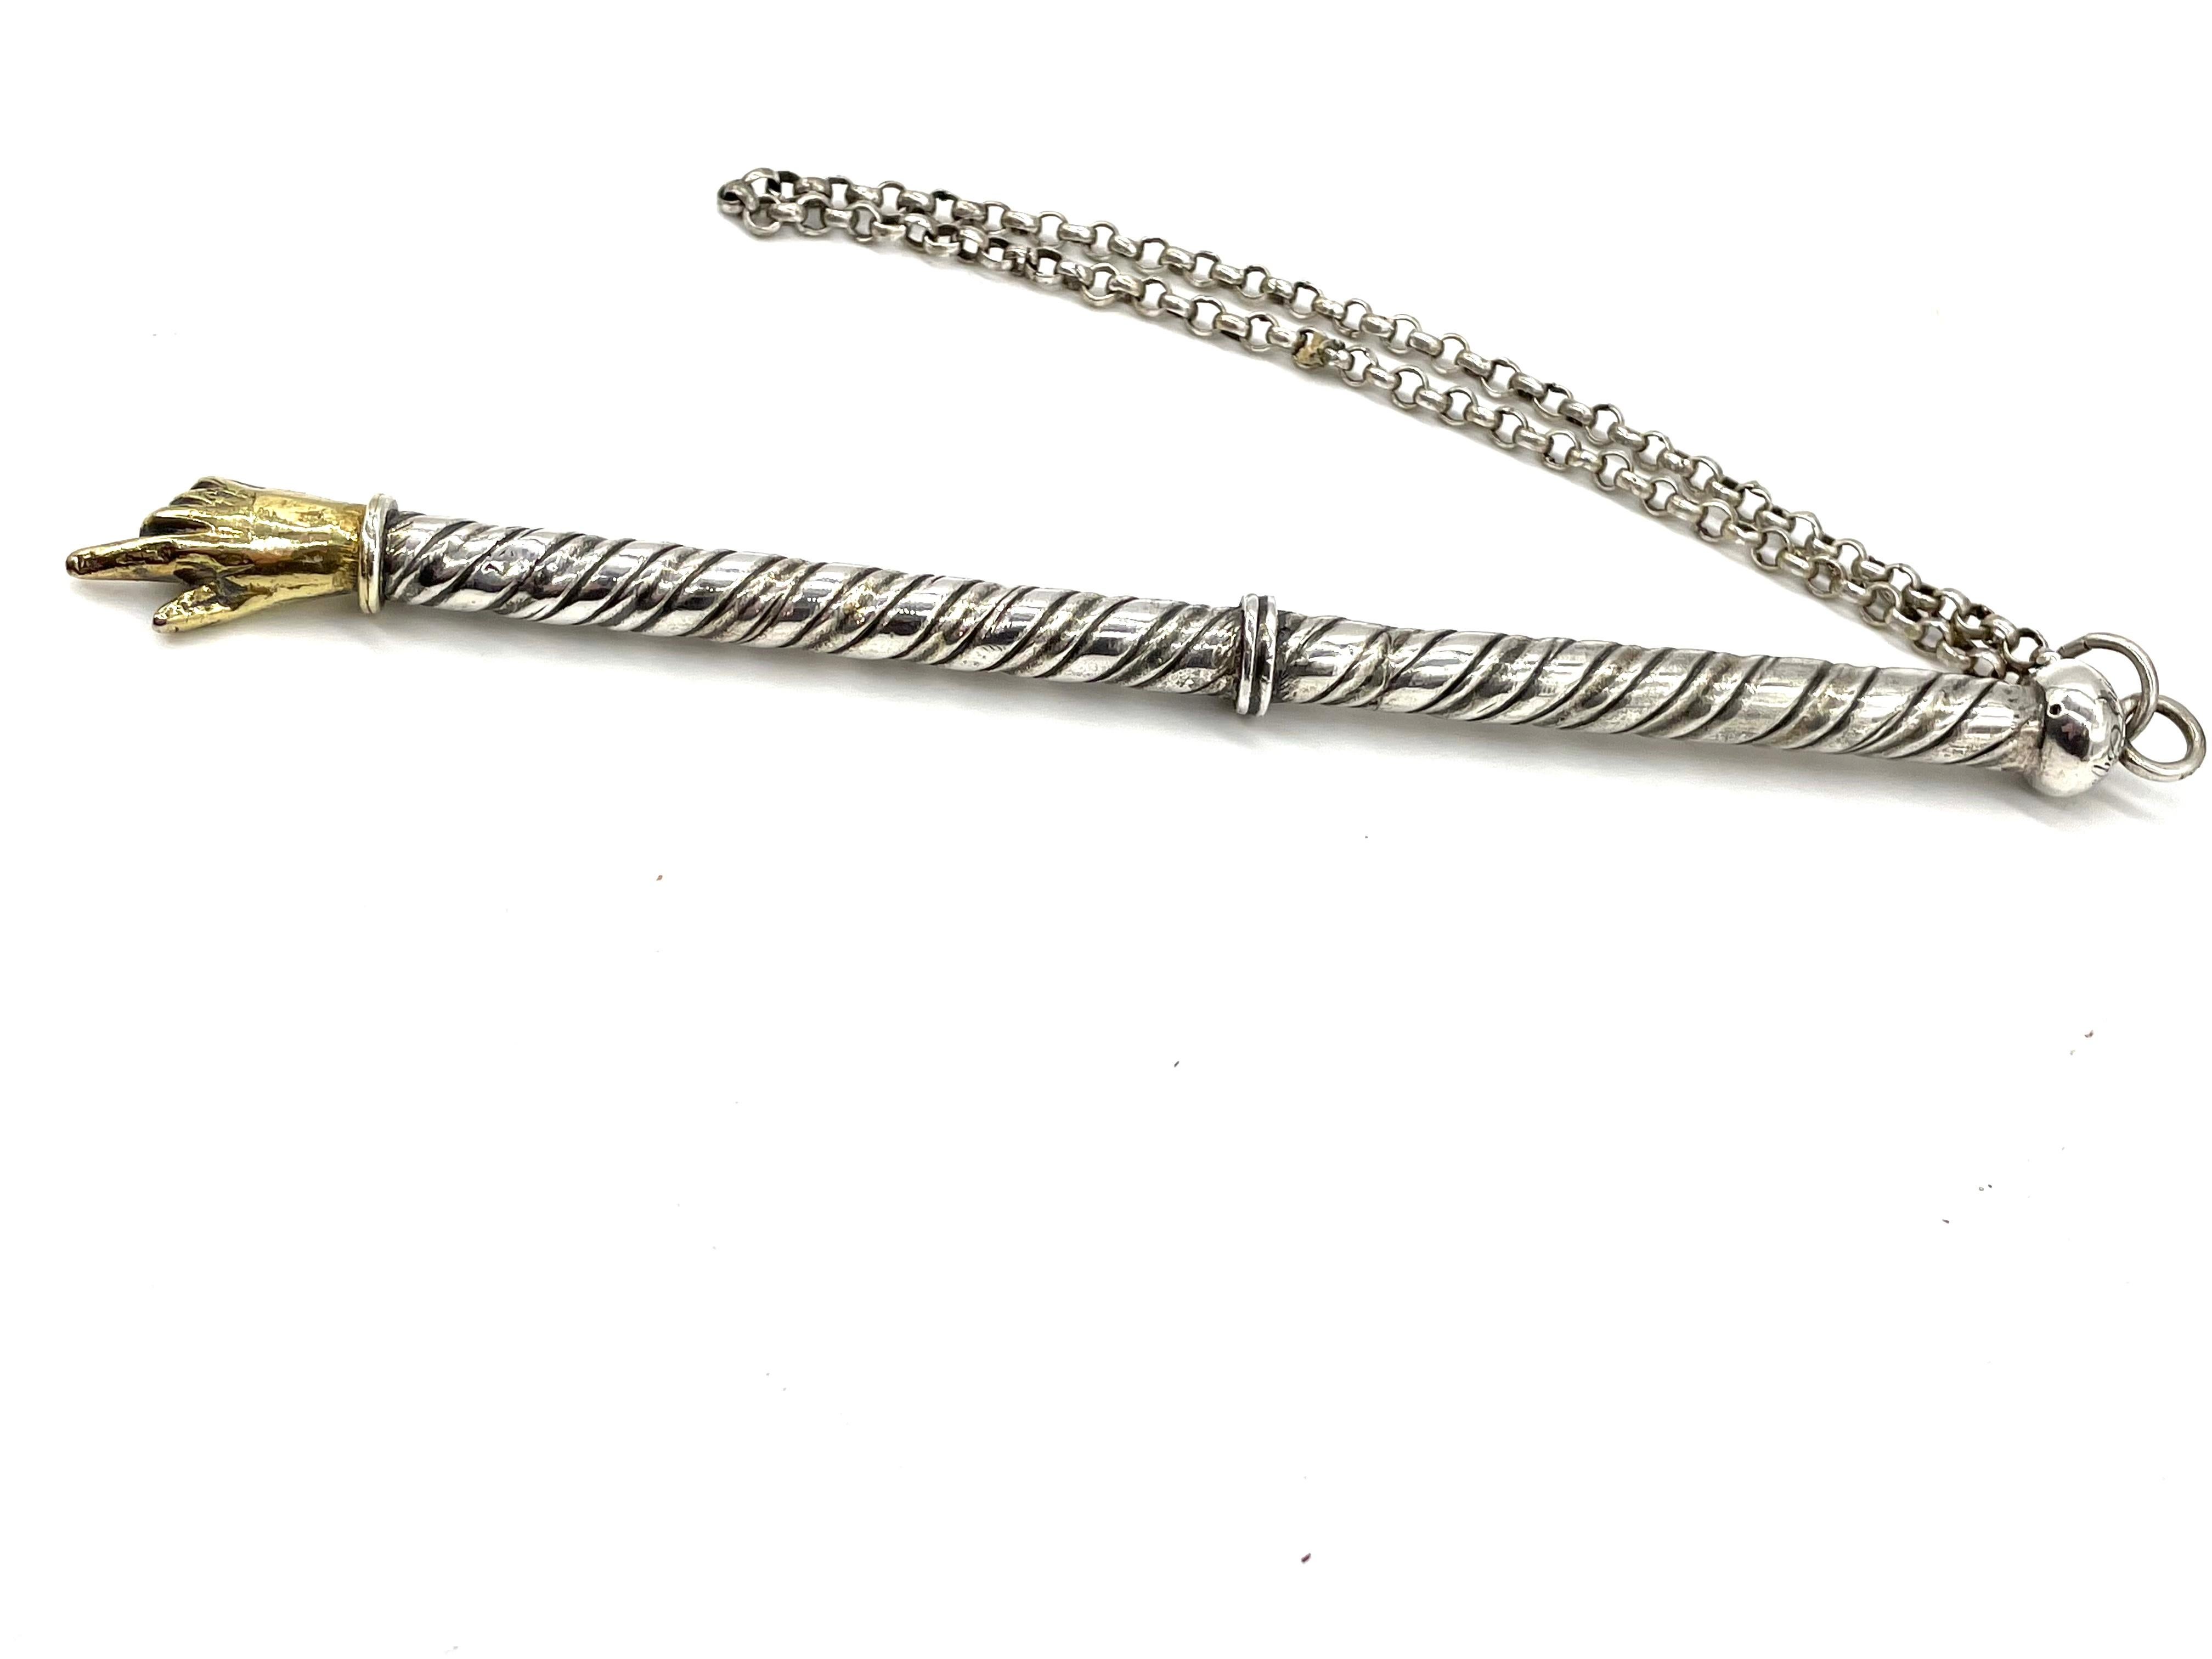 A late 18th century continental parcel-gilt silver Torah pointer made in Germany. This magnificent torah pointer is shaped in a tapered spiral form. At one end of the pointer, a beautifully designed gilt hand, while at the other a small dome